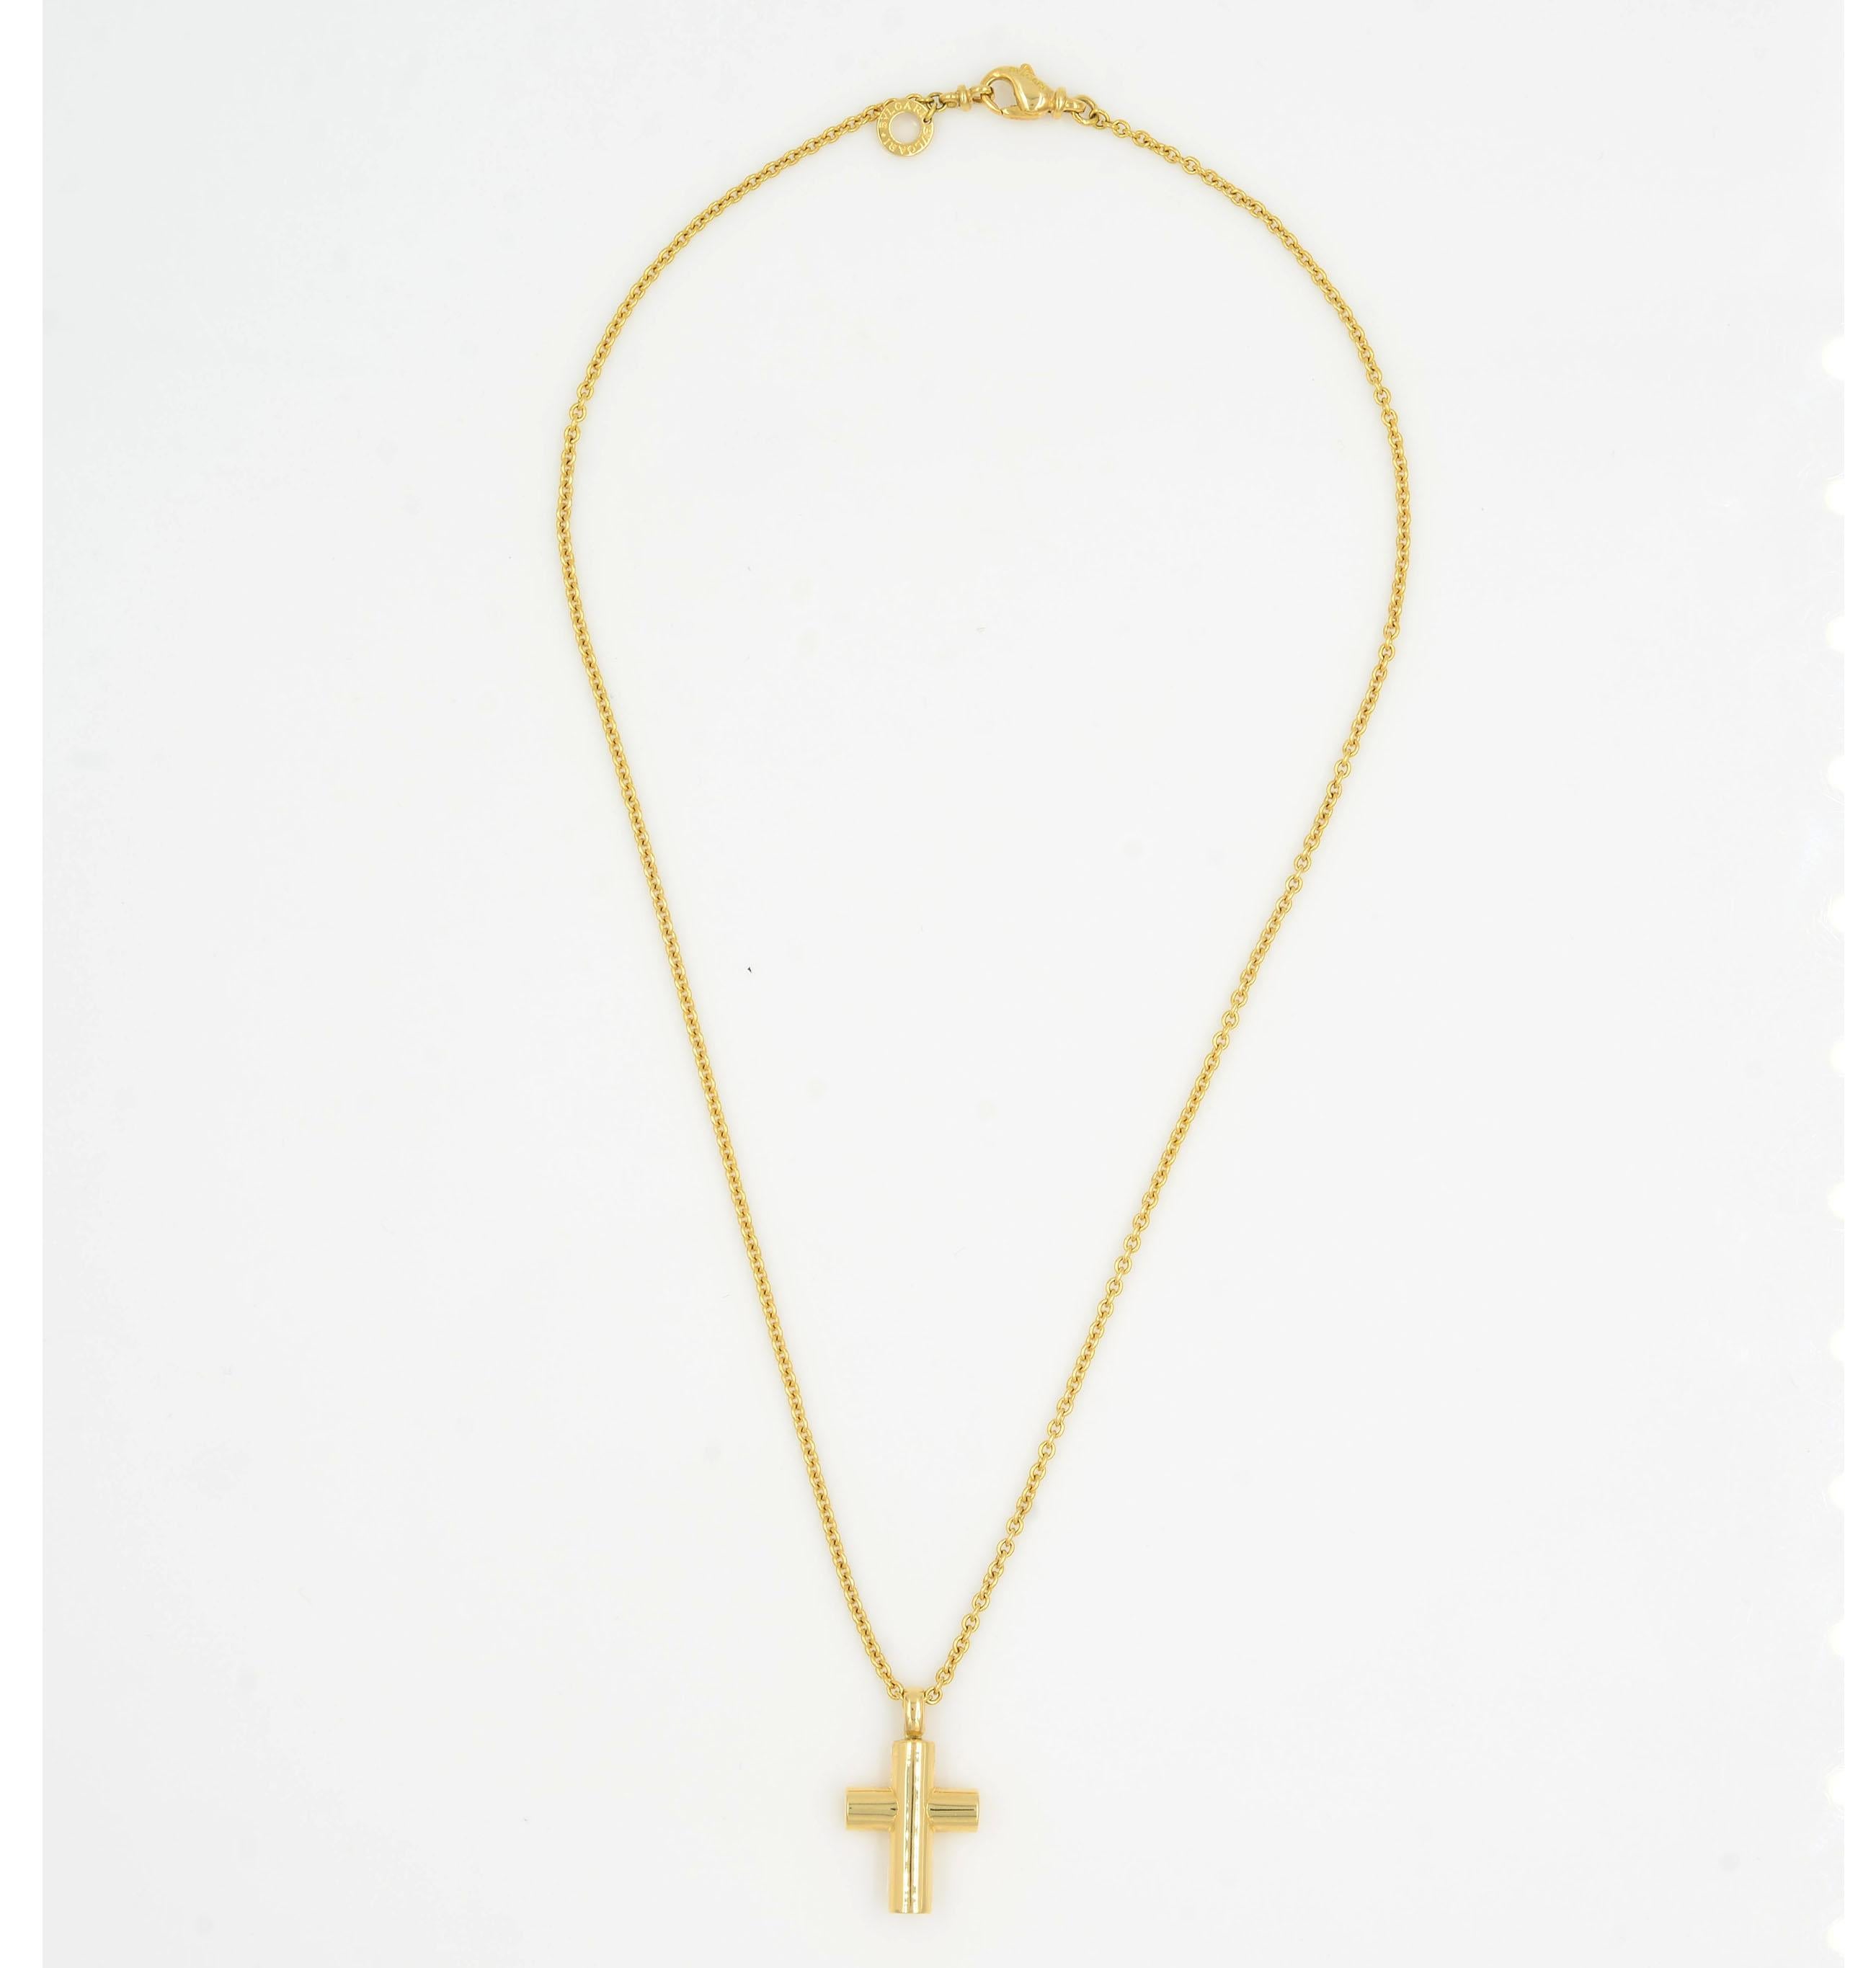 Bvlgari Yellow Gold Cross On Chain 18K
Details:
So clean and so simple yet it is timeless and with yellow gold looking so rich and vibrant you are sure to receive many compliments.
Chain Length: 15 inches
Pendant Length: with bail 1